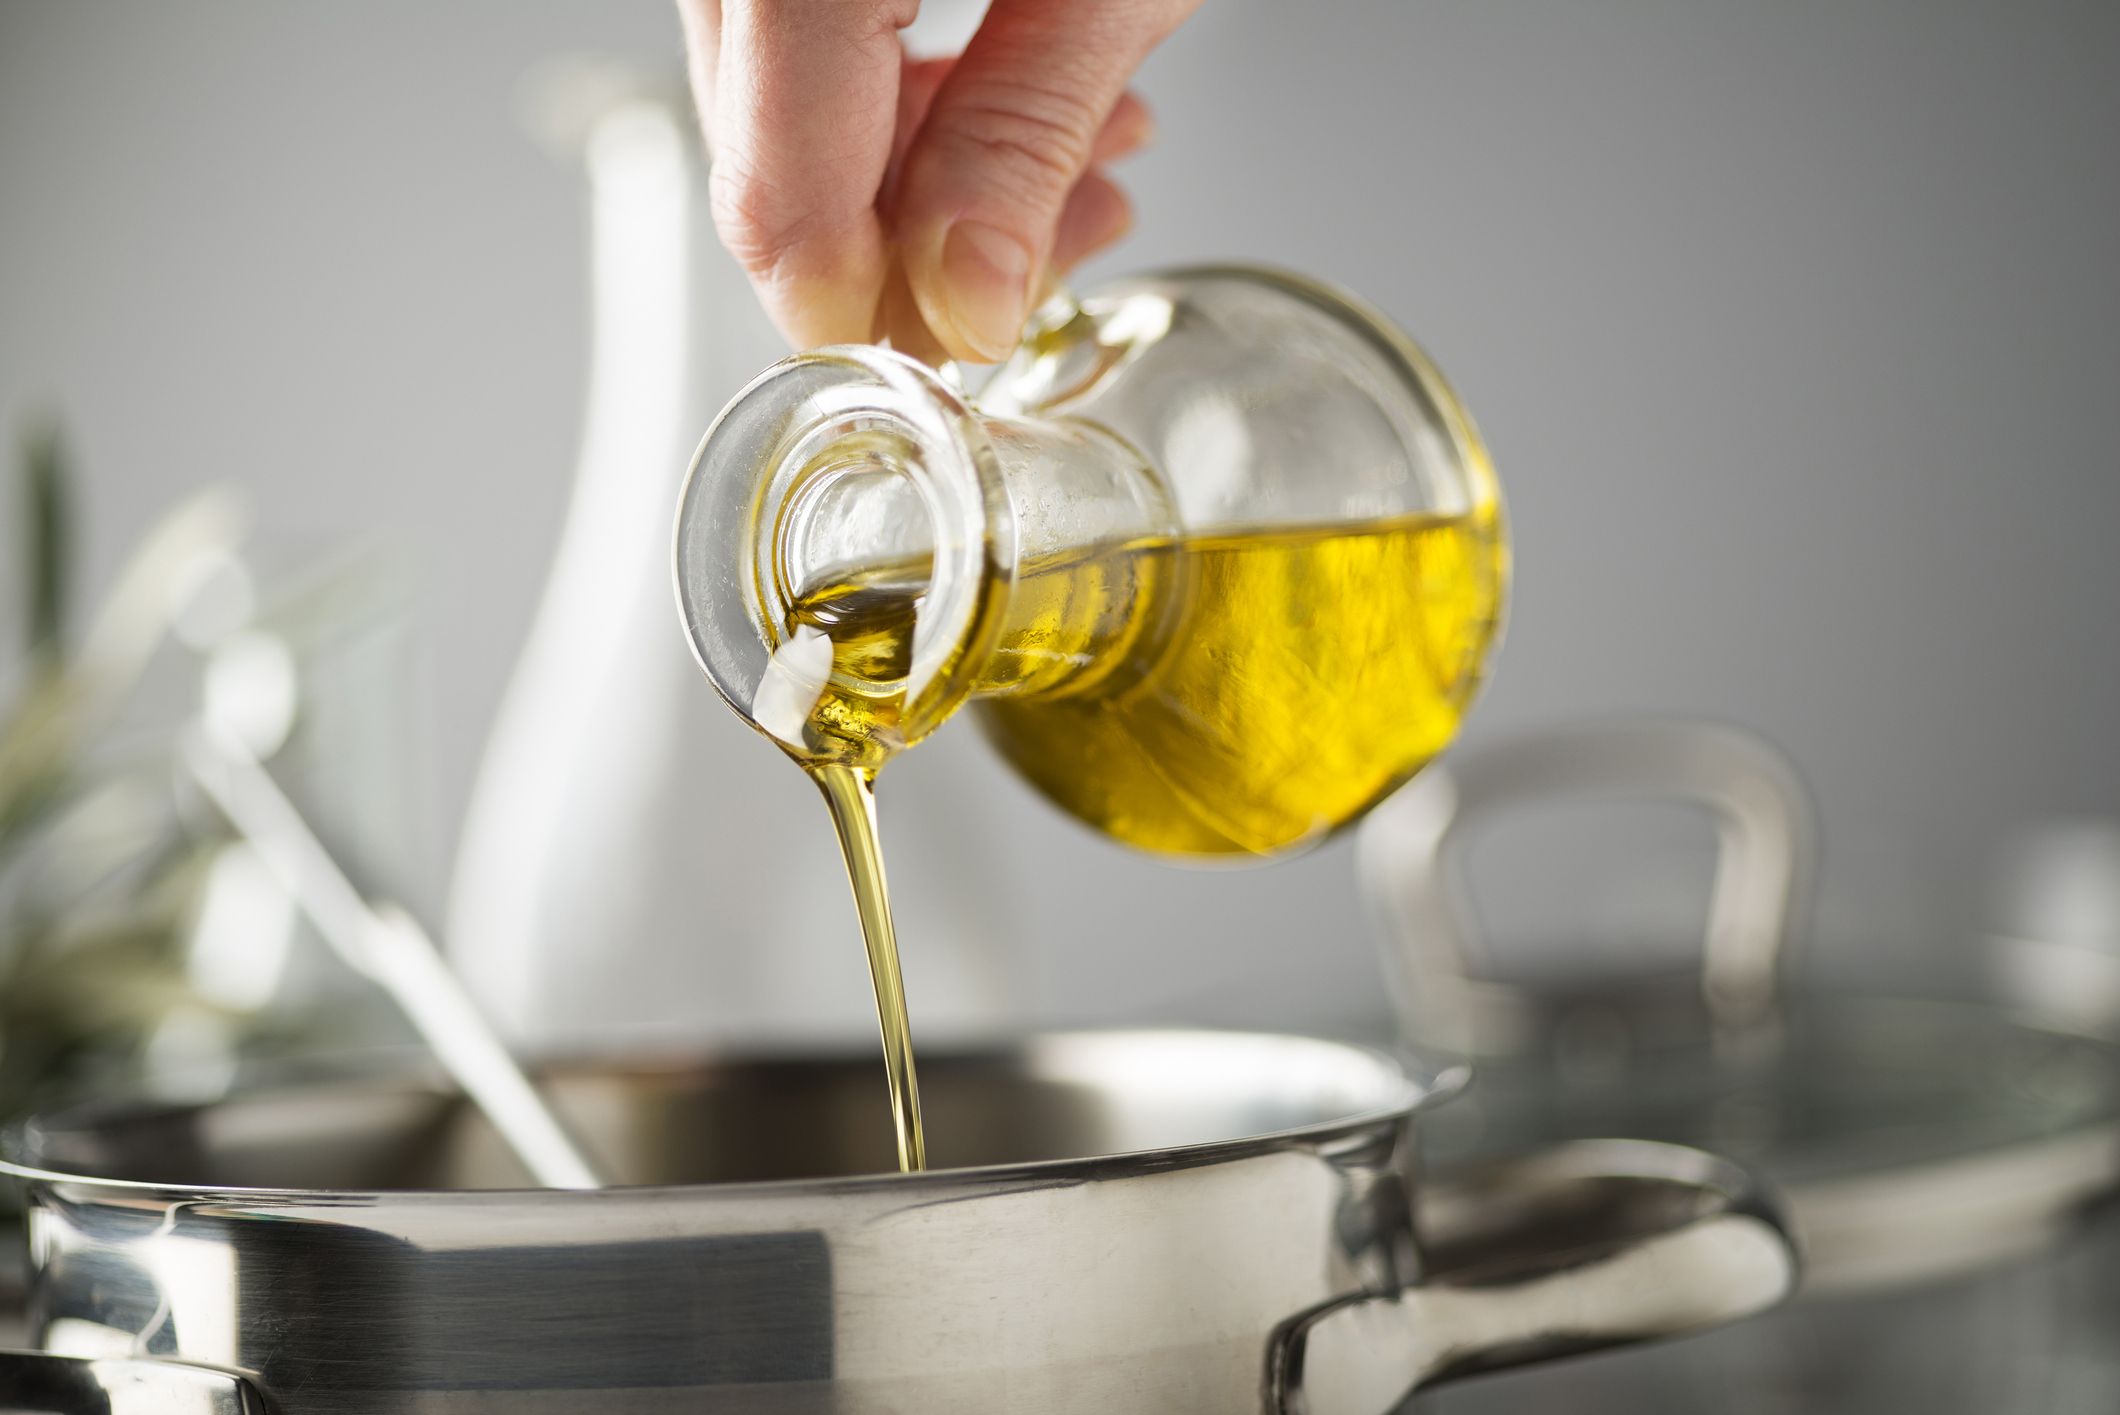 5 Healthiest Cooking Oils and 5 to Skip, According to RDs